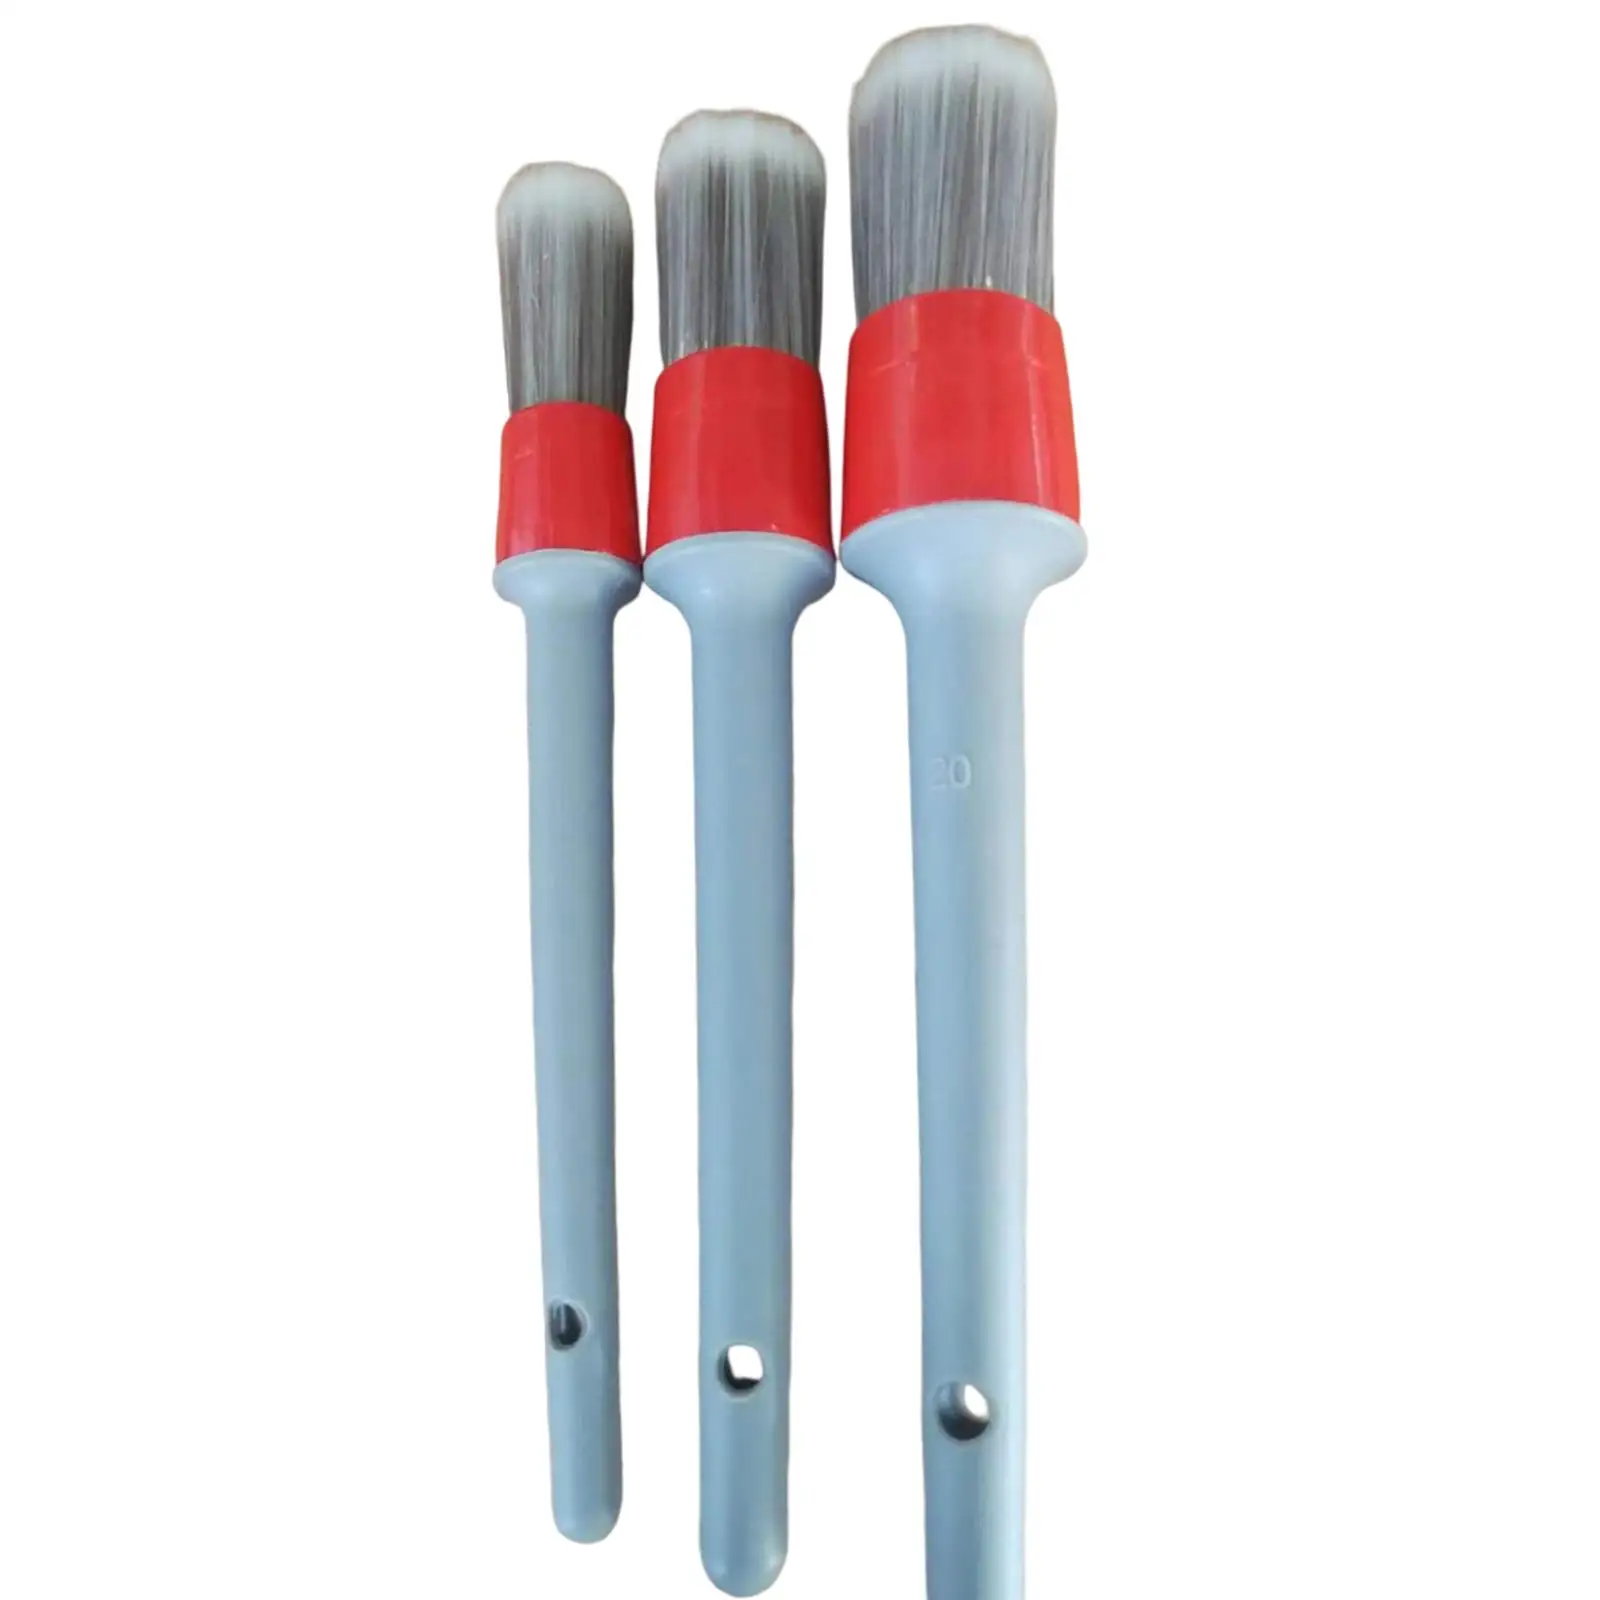 Car Detailing Brushes Set Automotive Detail Brushes for Cleaning Interior Washing Exterior Wheel Cup Holder Tire